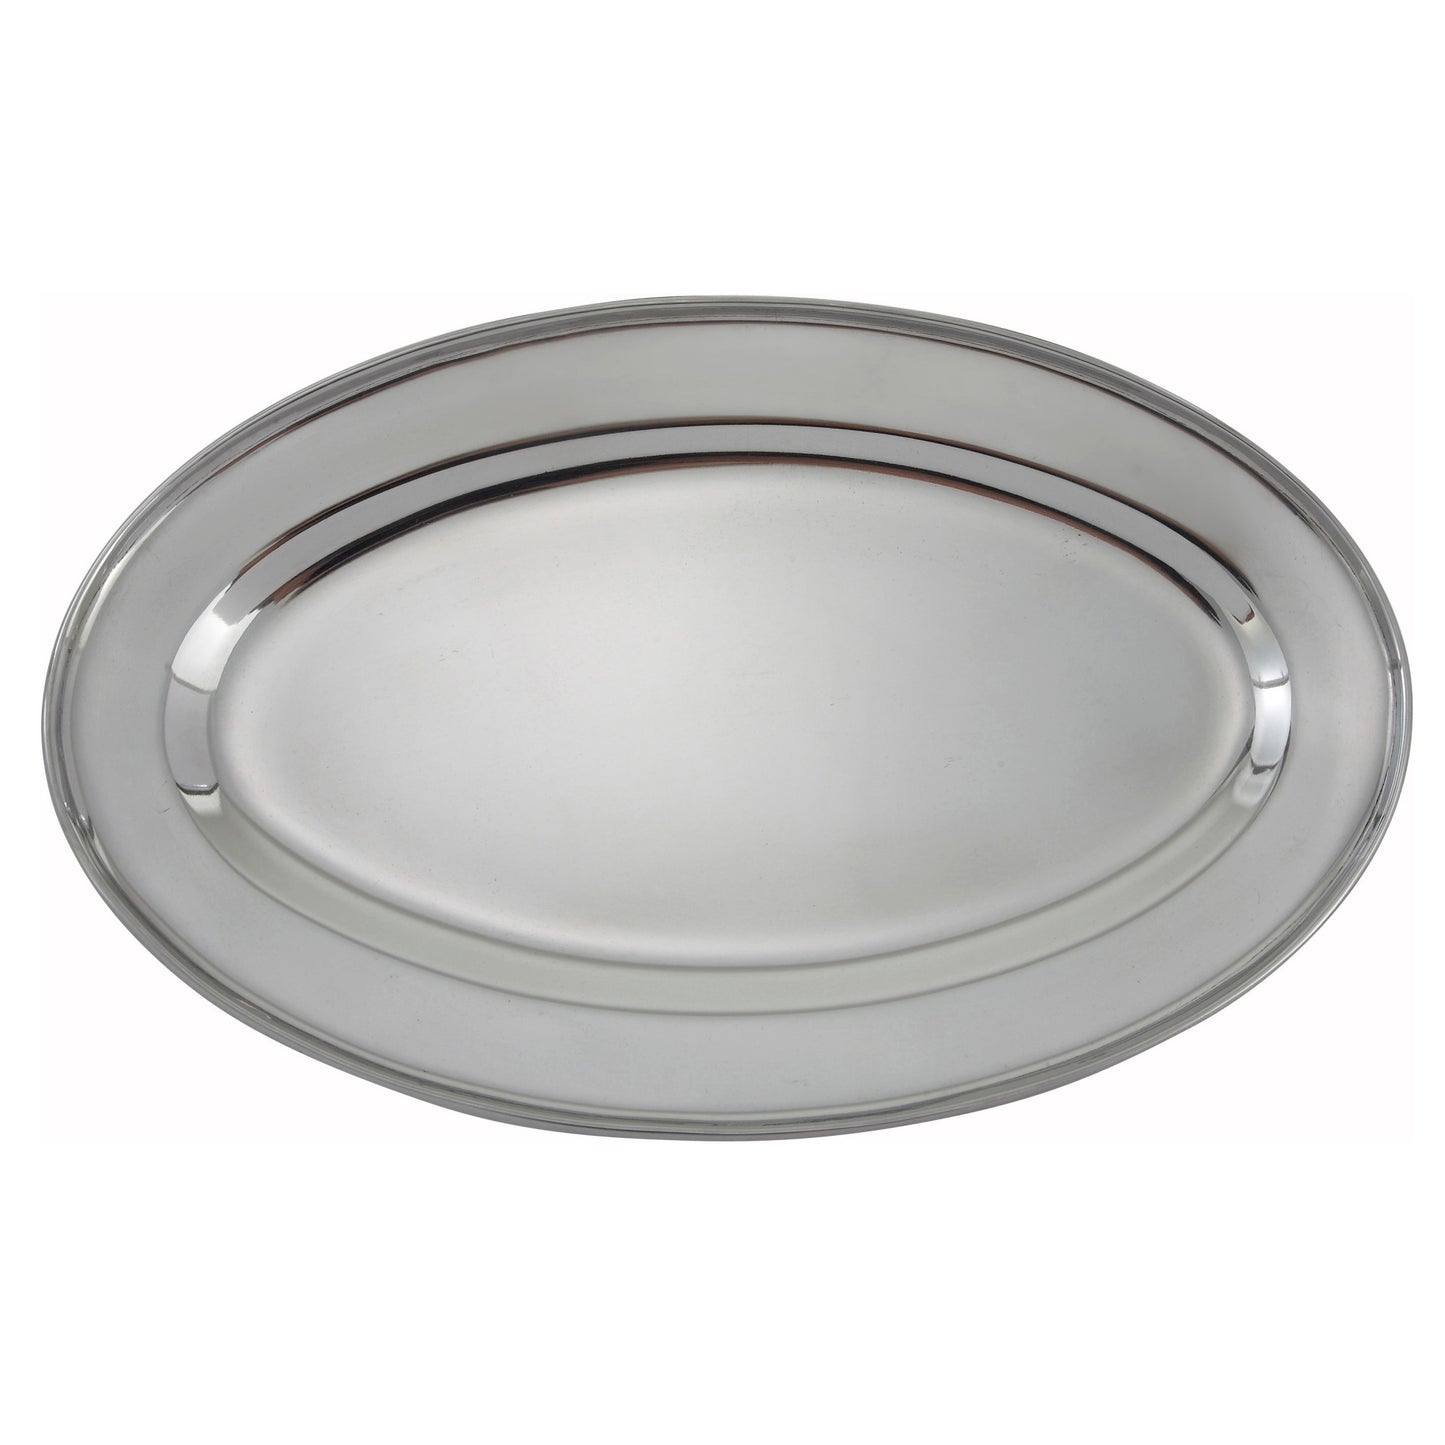 OPL-14 - Oval Platter, Stainless Steel - 14"